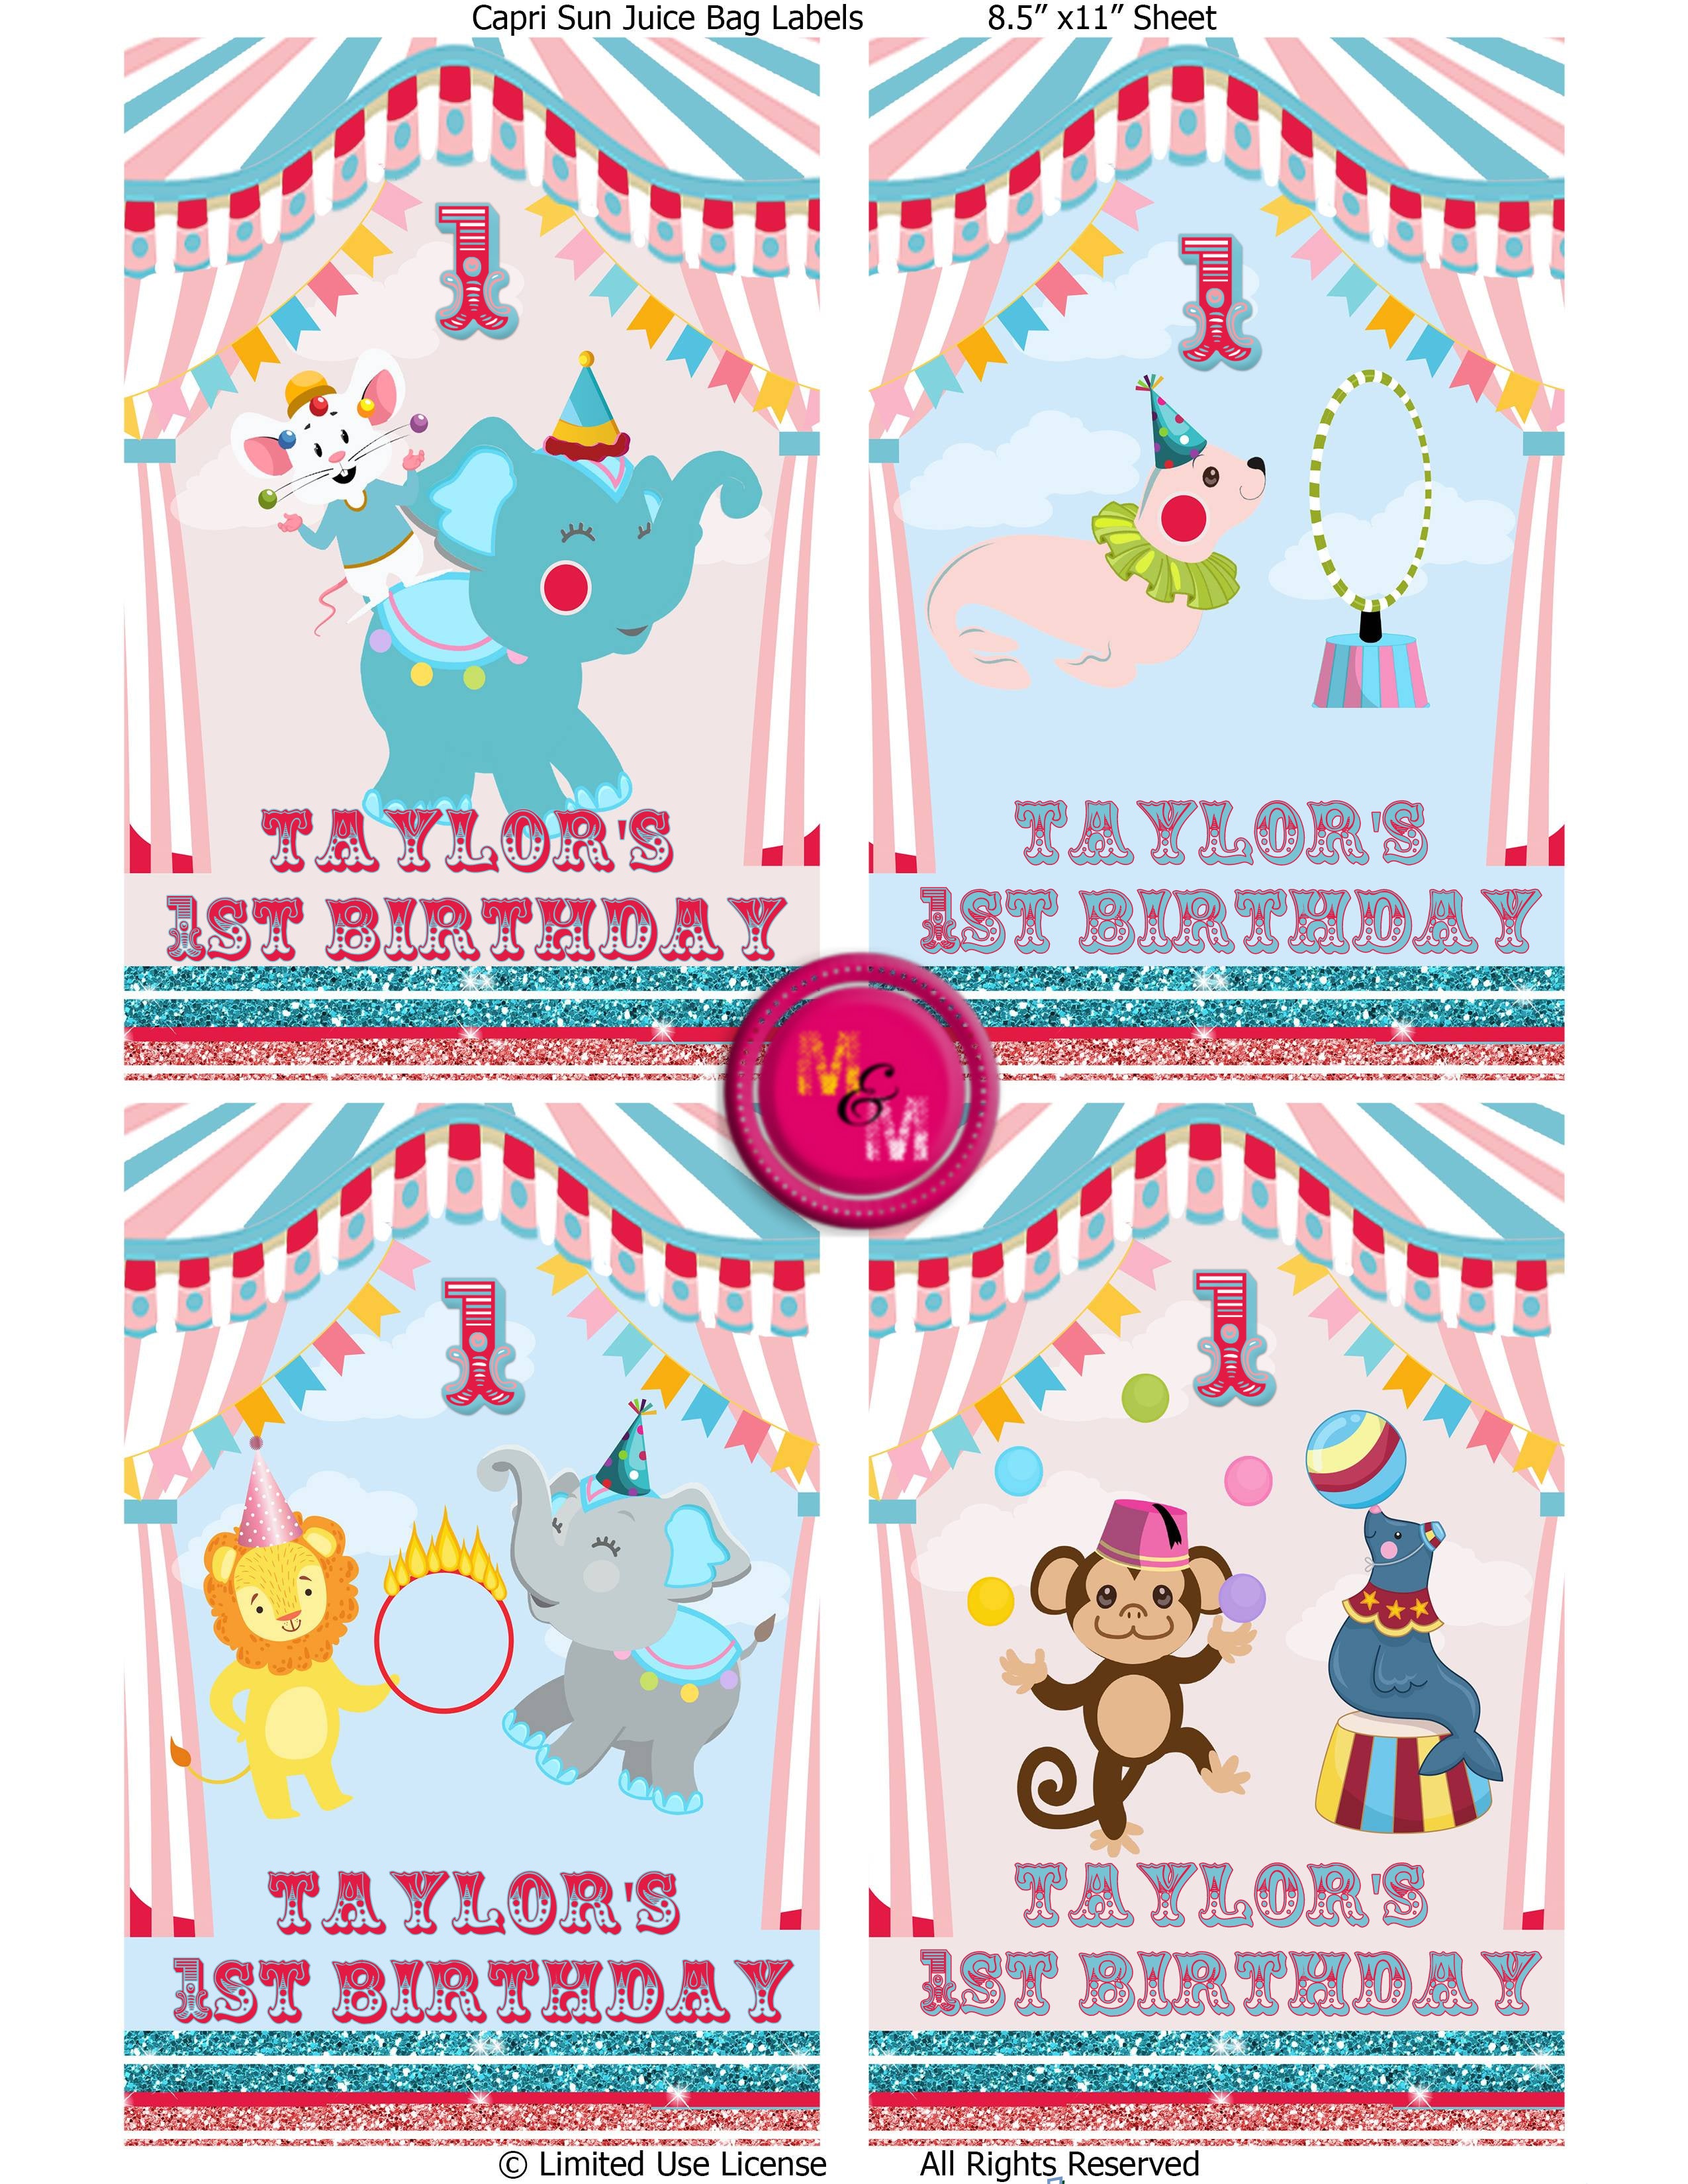 Editable Circus/Carnival Birthday Chip Bags & Juice Pouch Set, Circus Printables